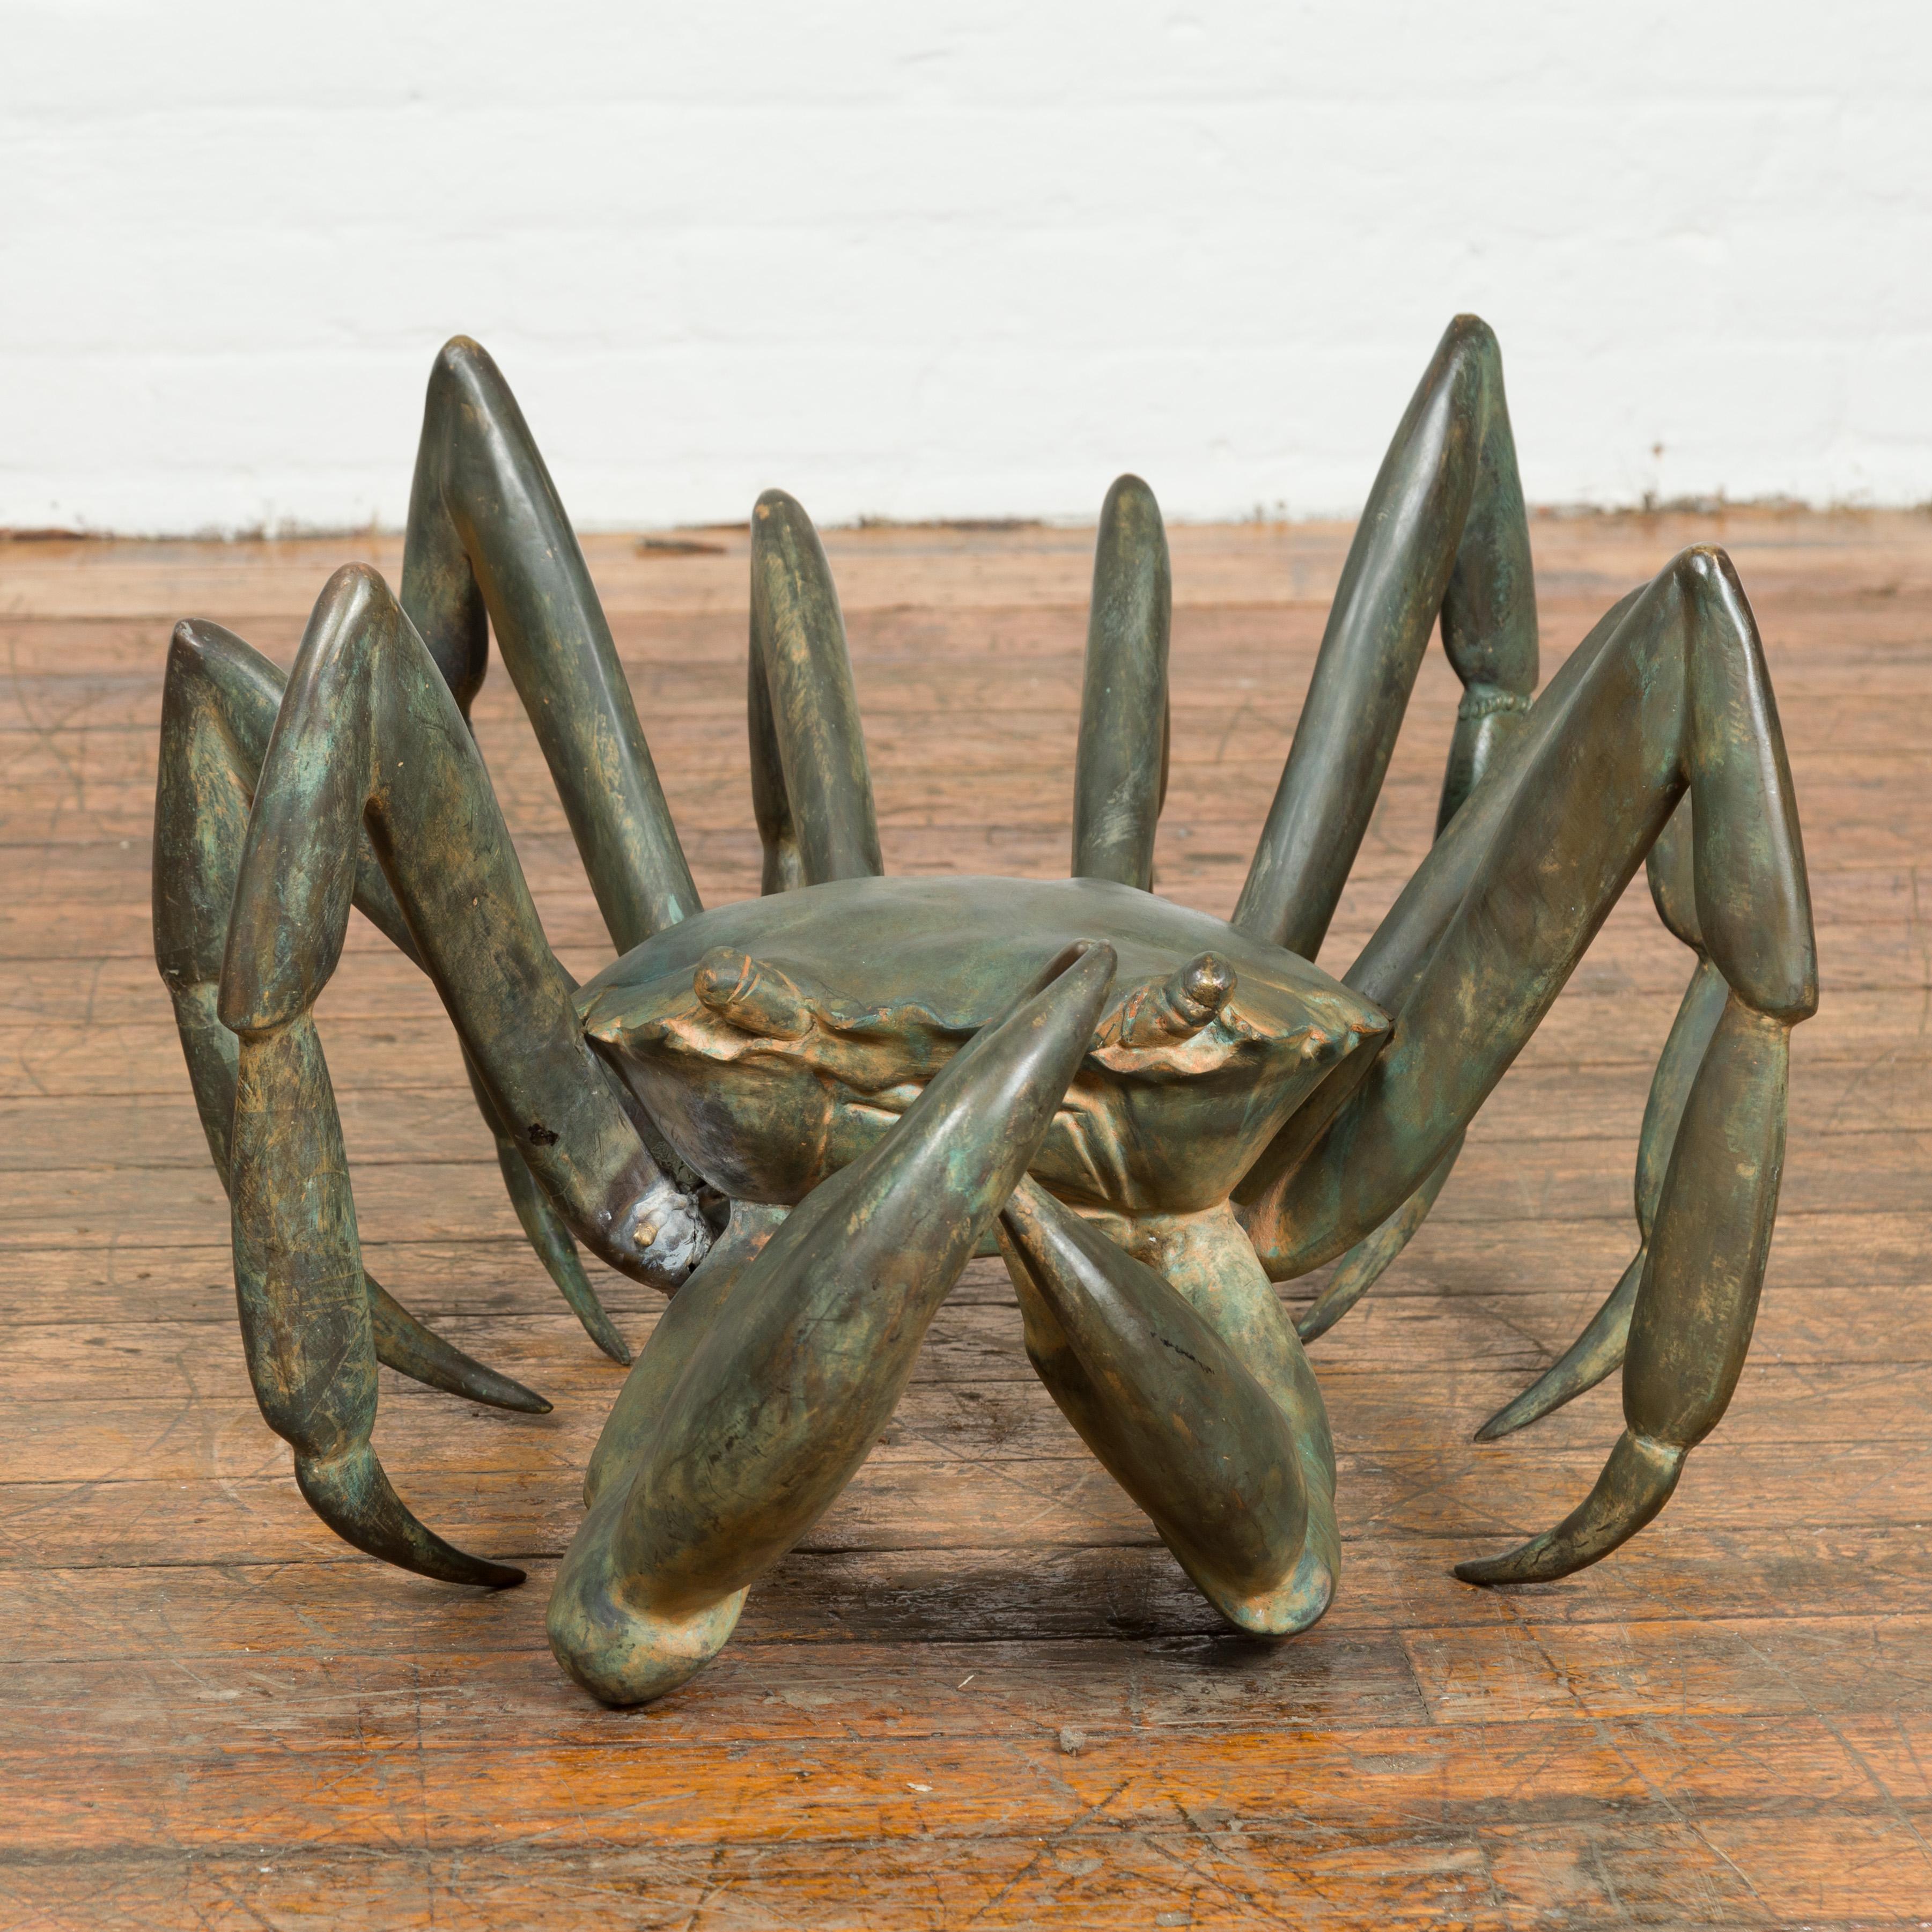 A vintage lost wax cast bronze crab coffee table base from the mid 20th century, with verdigris patina. Talk about making a statement in a living room! Created with the traditional technique of the lost-wax (à la cire perdue) which allows for great